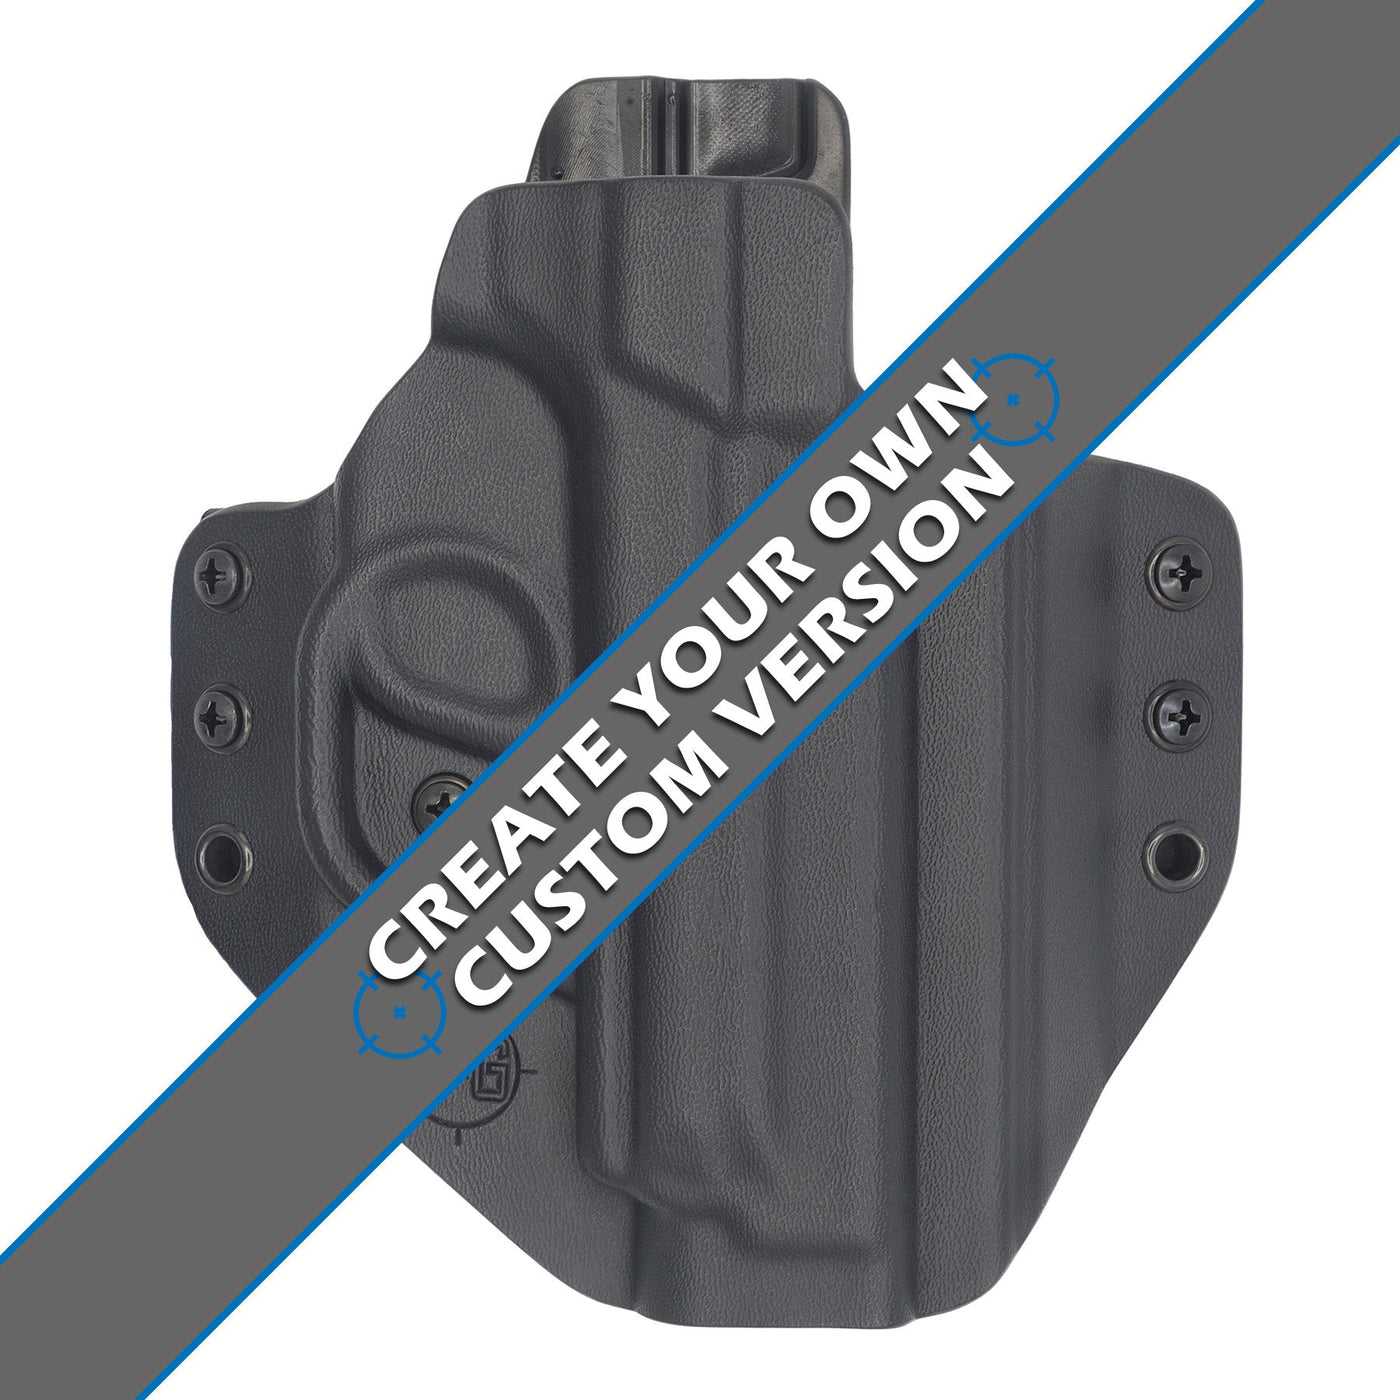 C&G Holsters custom Covert OWB kydex holster for Smith & Wesson M&P 2.0 9/40